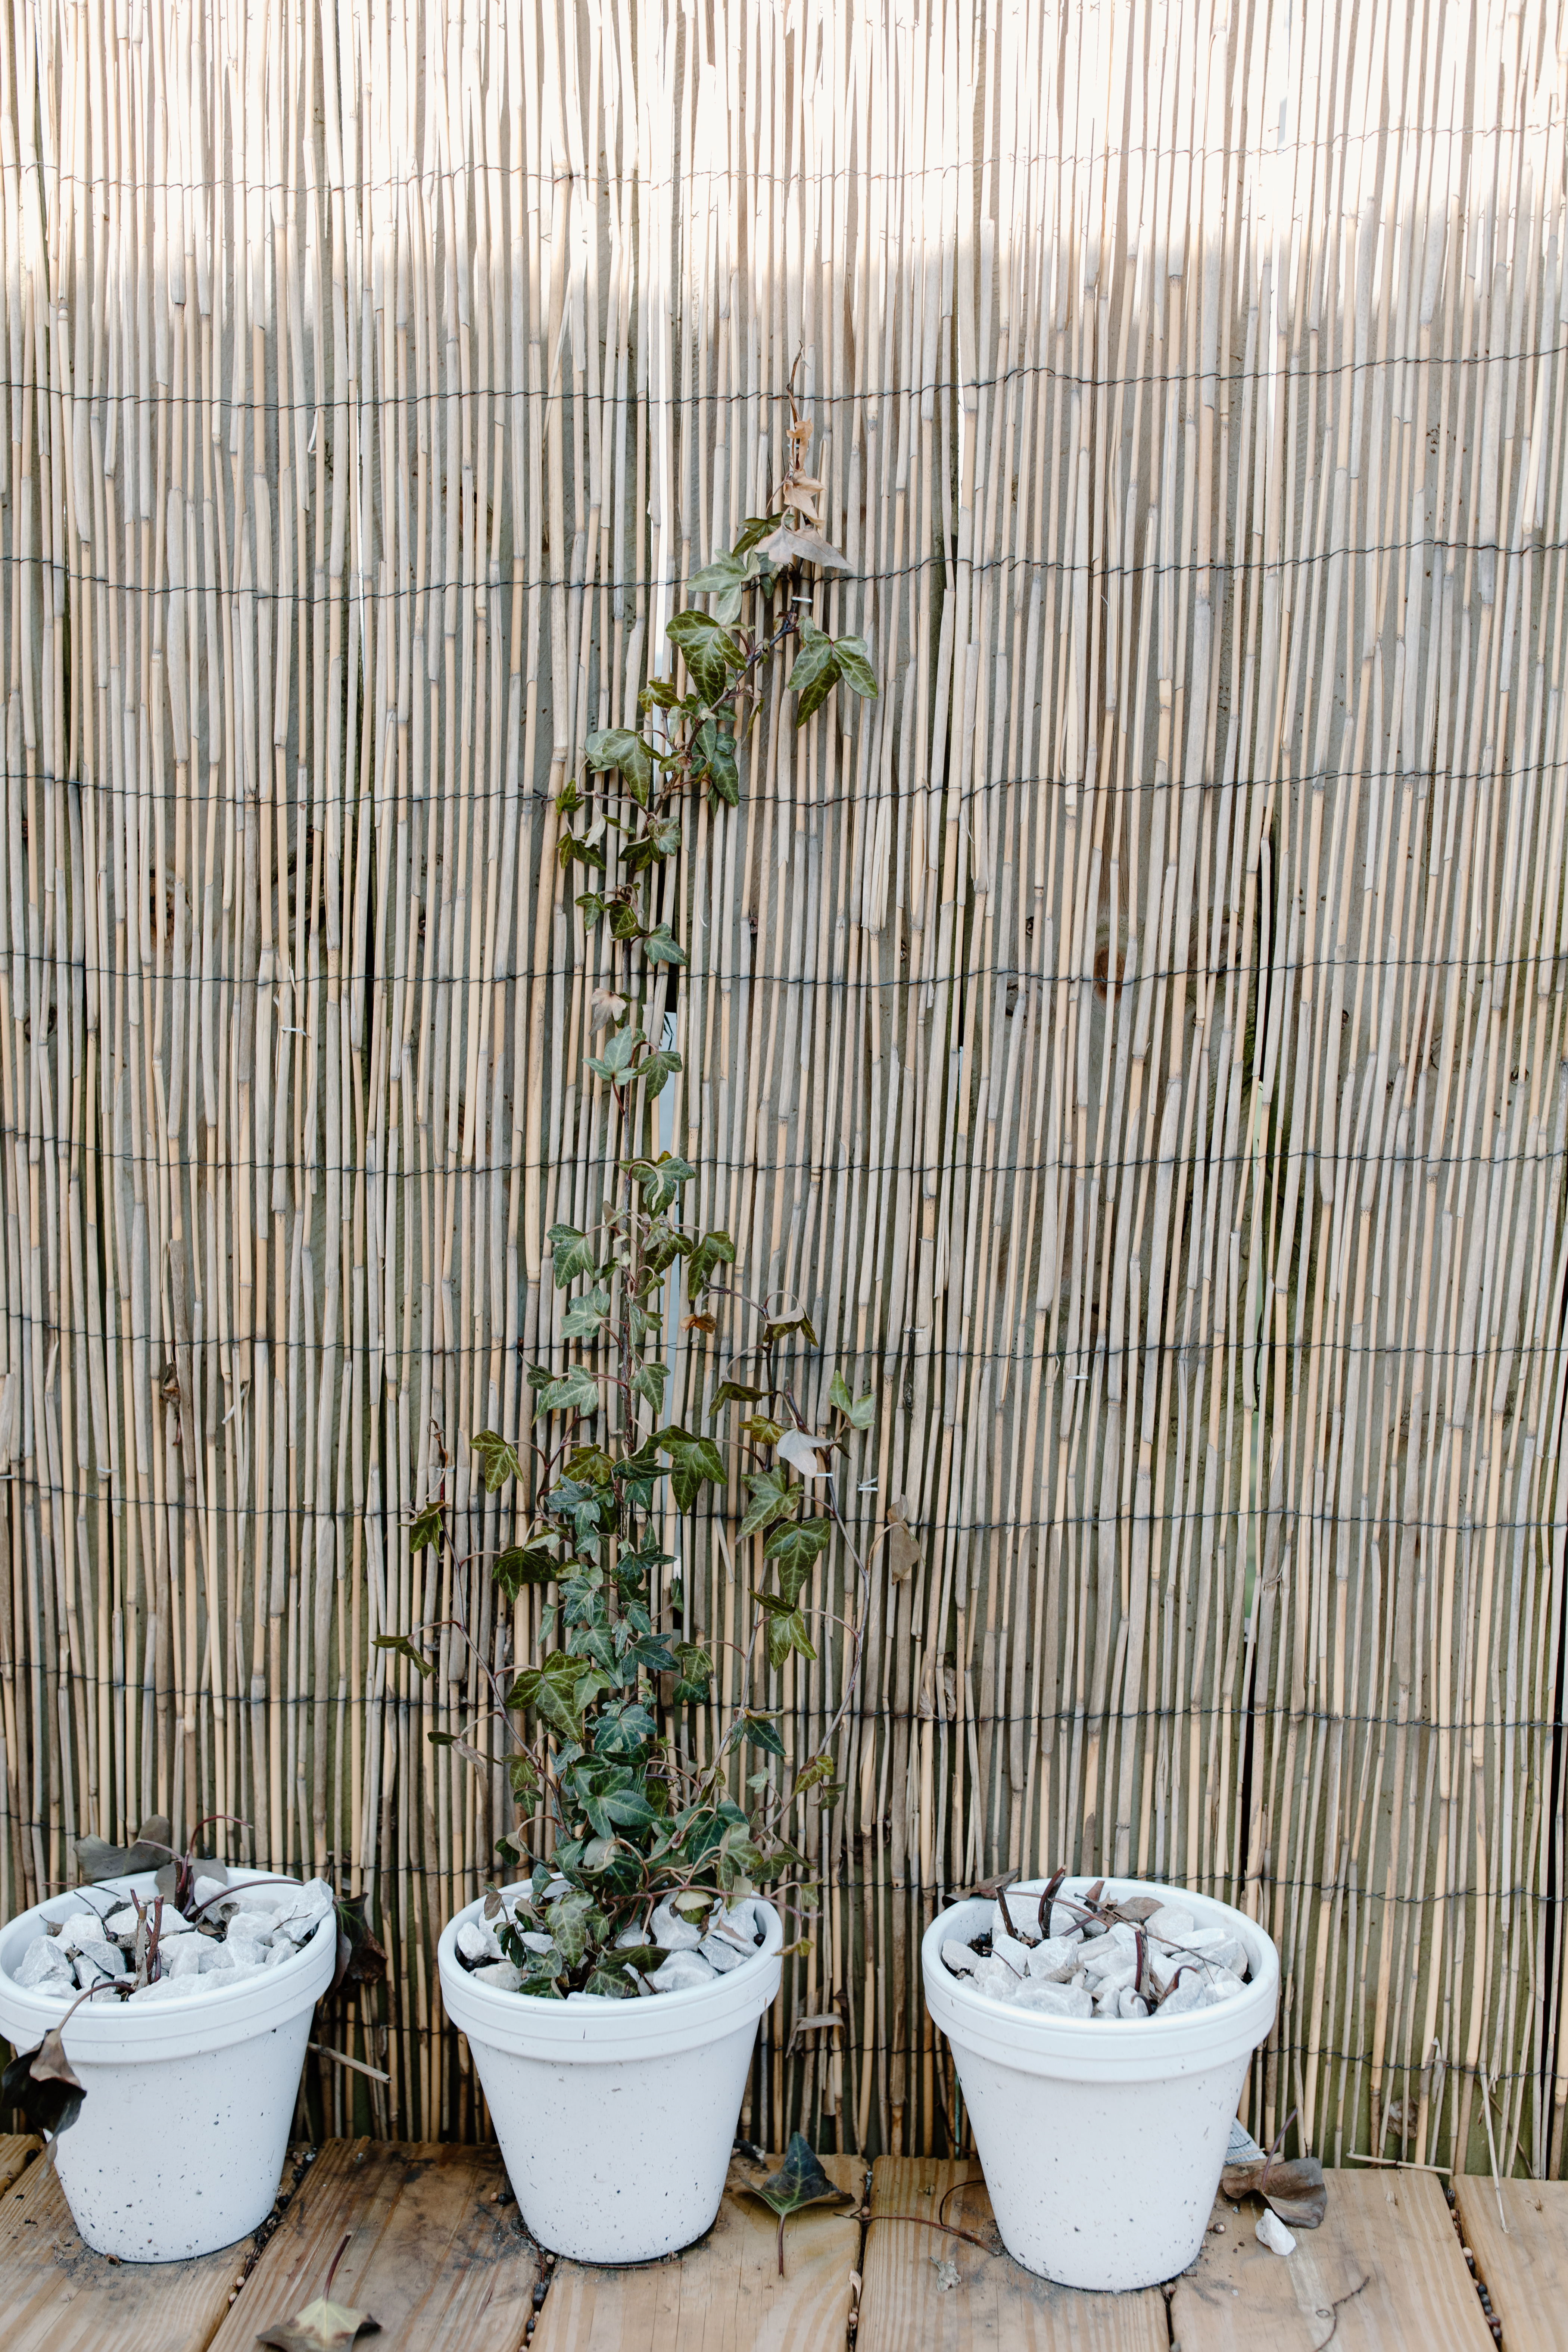 Bamboo patio screening with three potted plants on deck